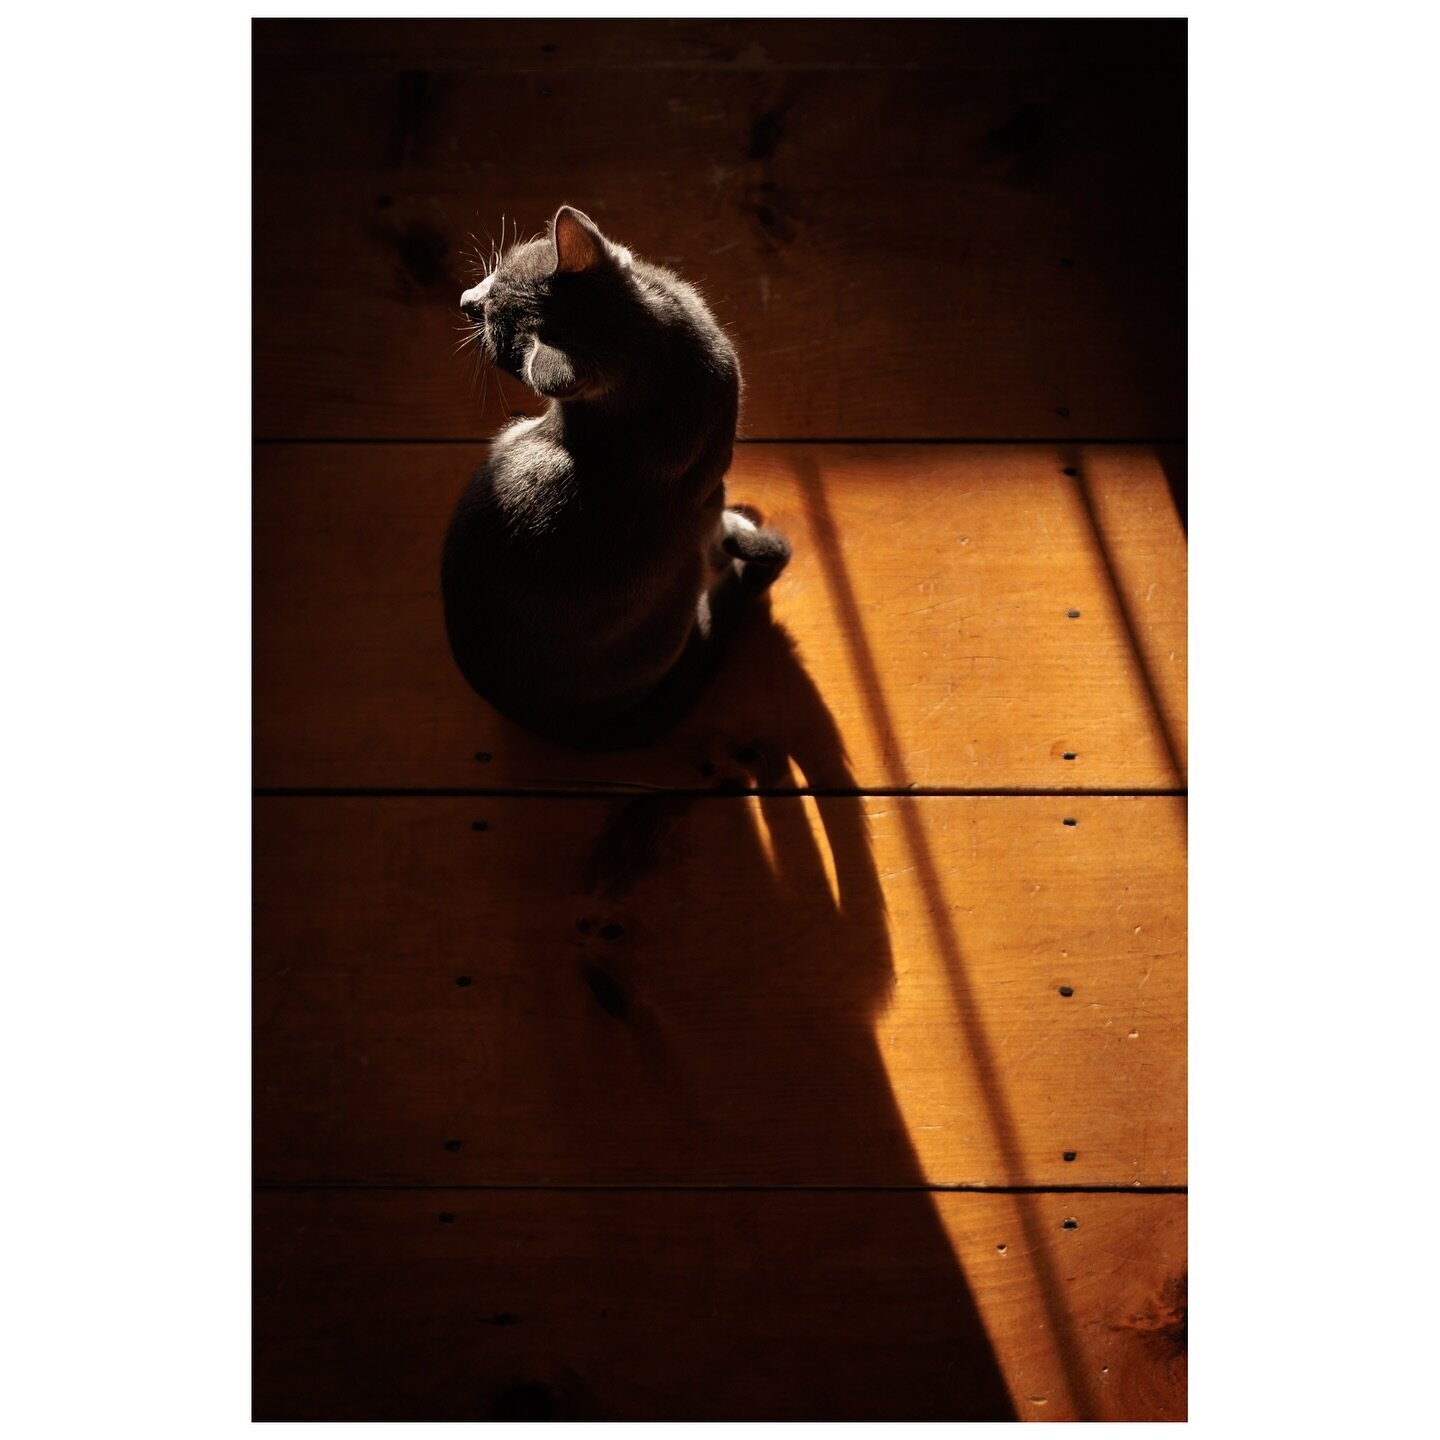 Finding the best sun spots for #caturday

#tea_journals #crazycatlady #nhphotographer #mycanonstory #the_sterling_cat